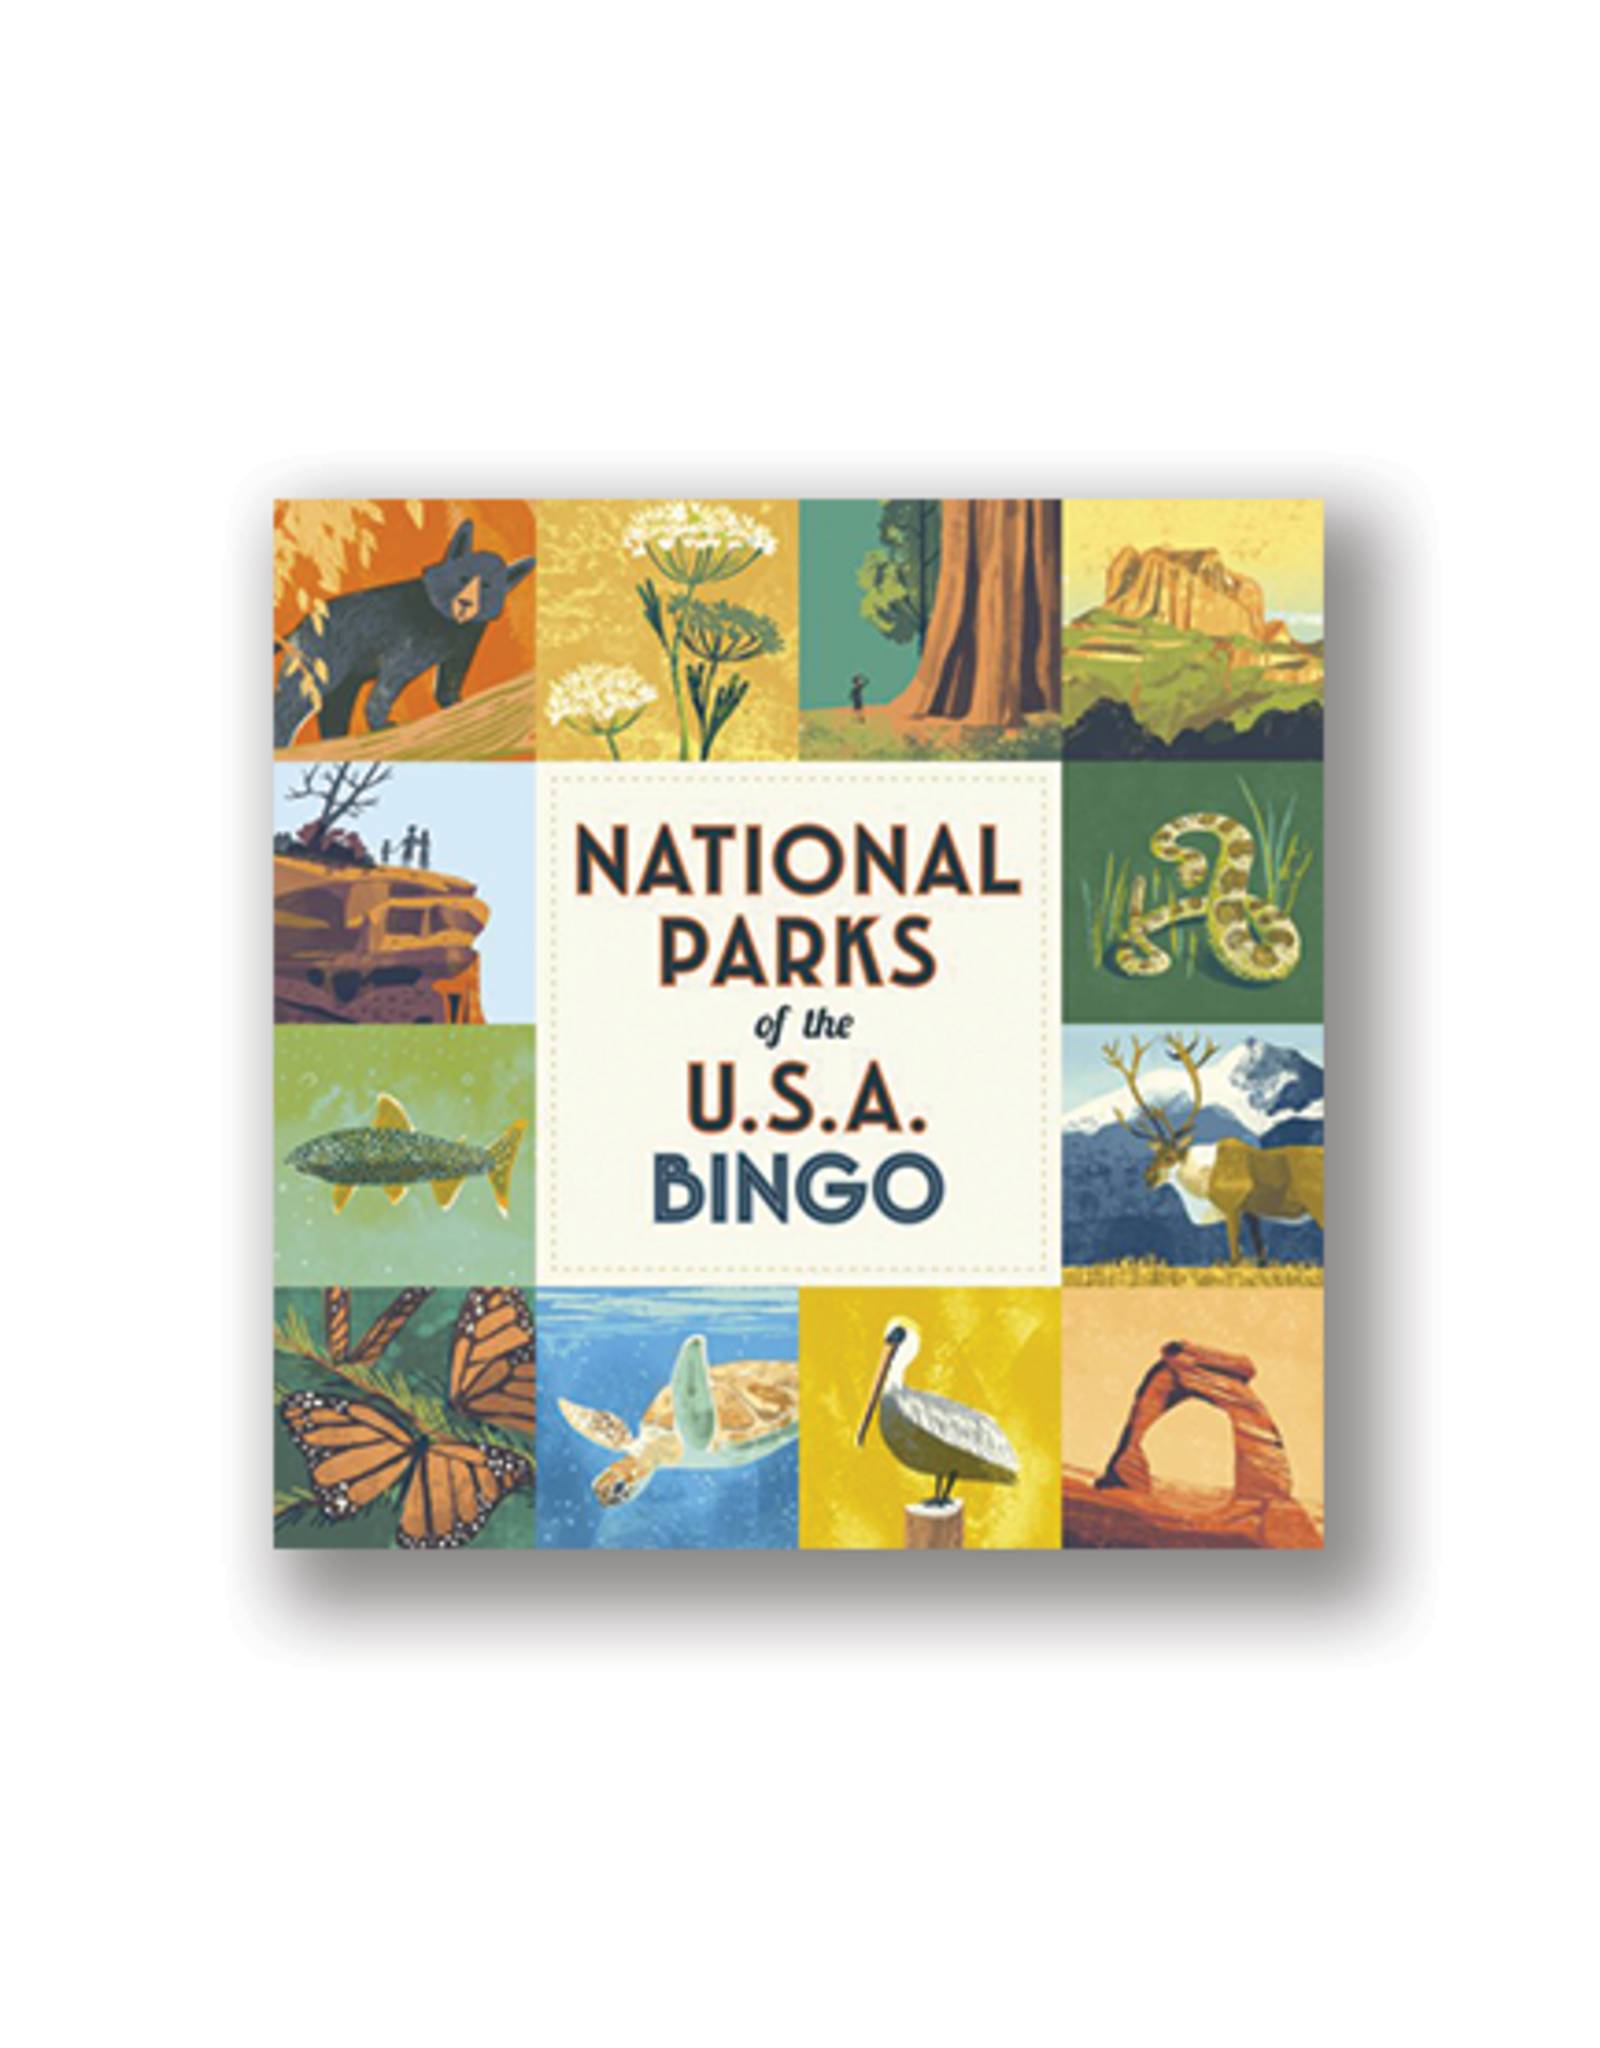 National Parks of the U.S.A Bingo Game